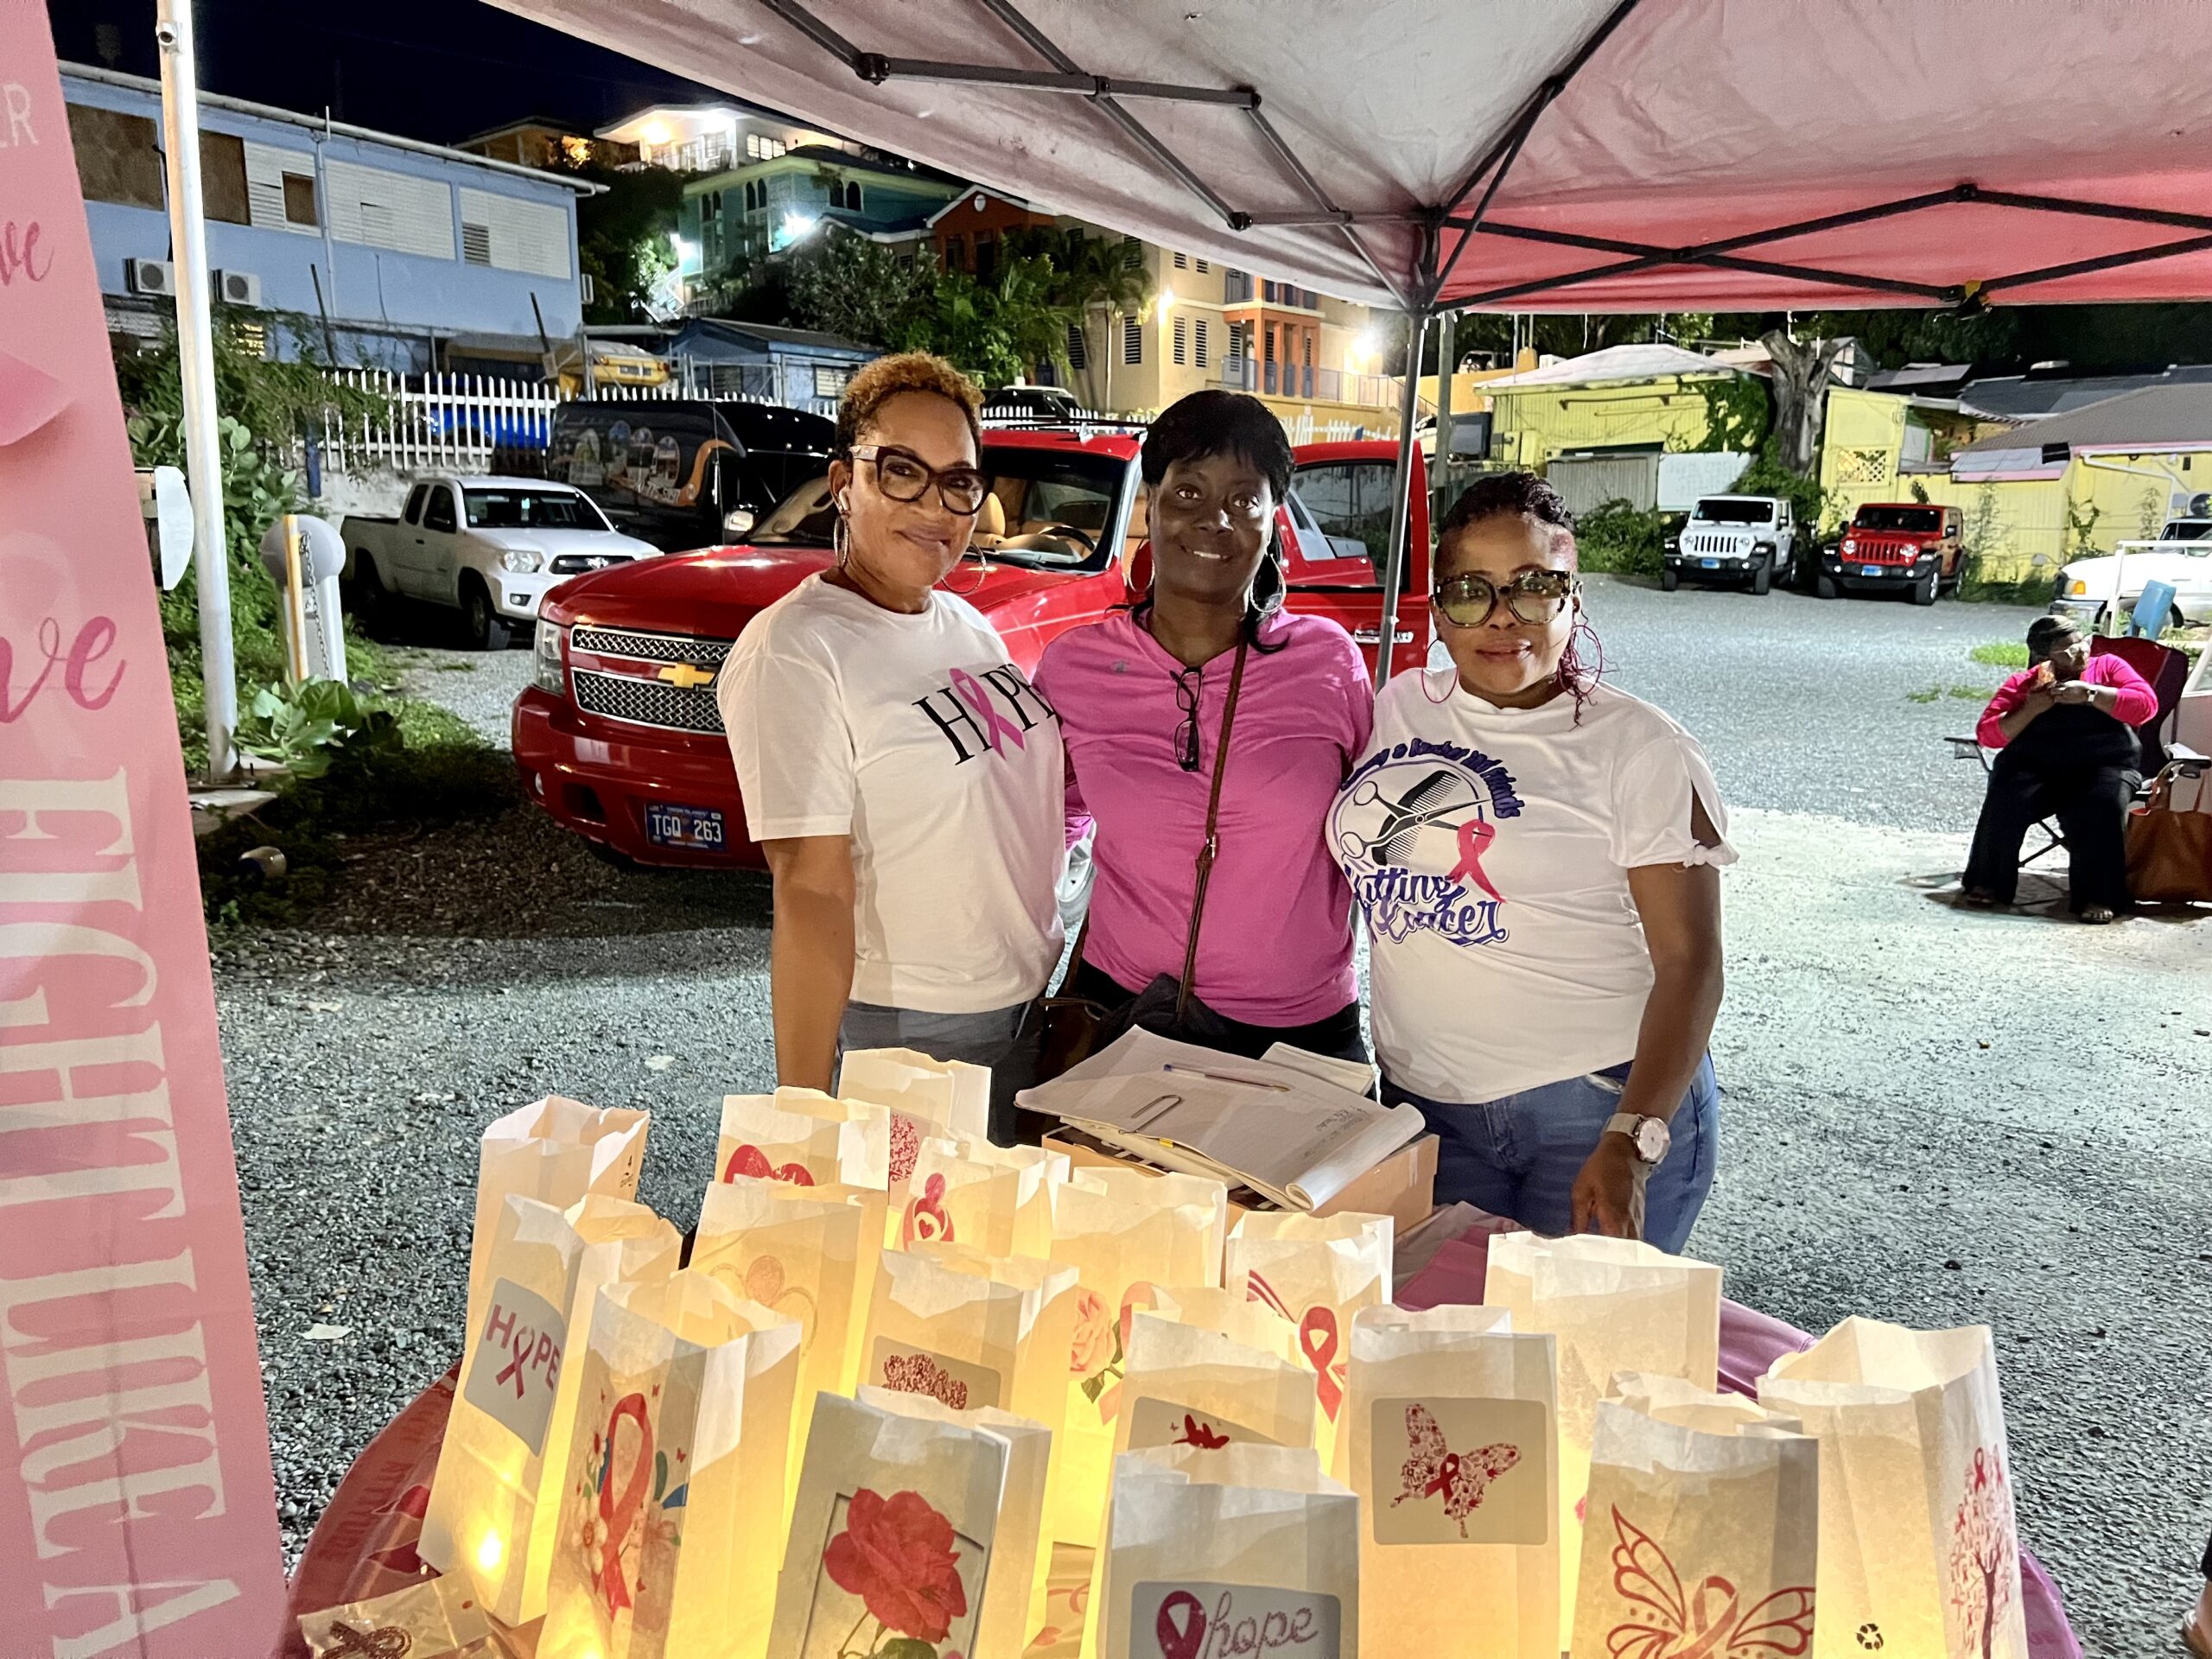 Myrtle Penn, Yvette Stapleton, and Shani Carbon sell luminaries to Light Up the Night against cancer. (Photo by Amy H. Roberts)